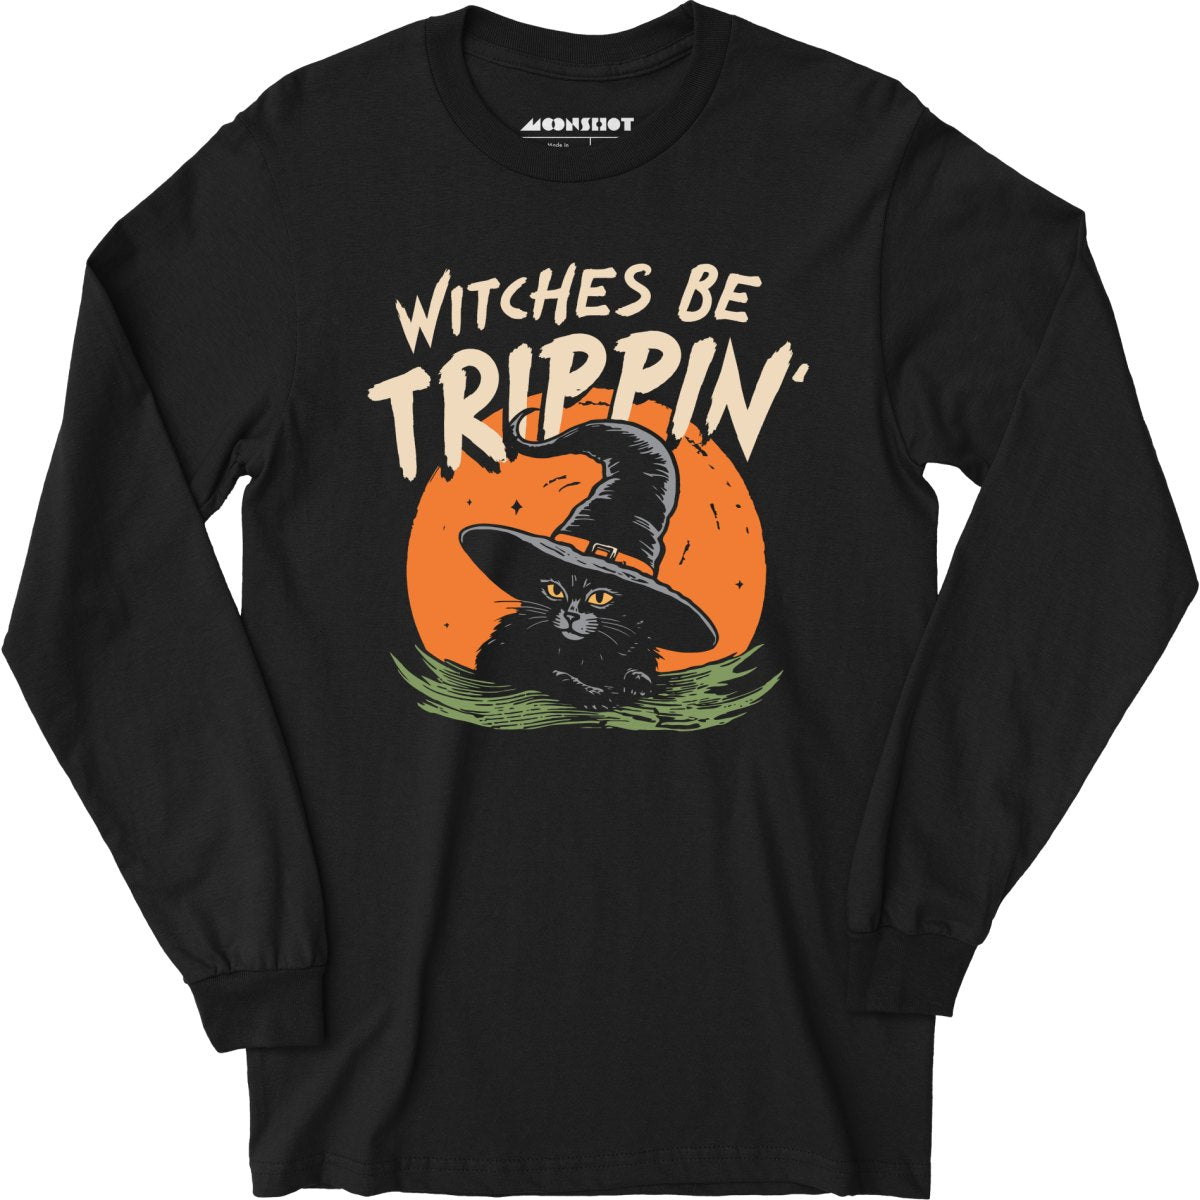 Witches Be Trippin' - Long Sleeve T-Shirt